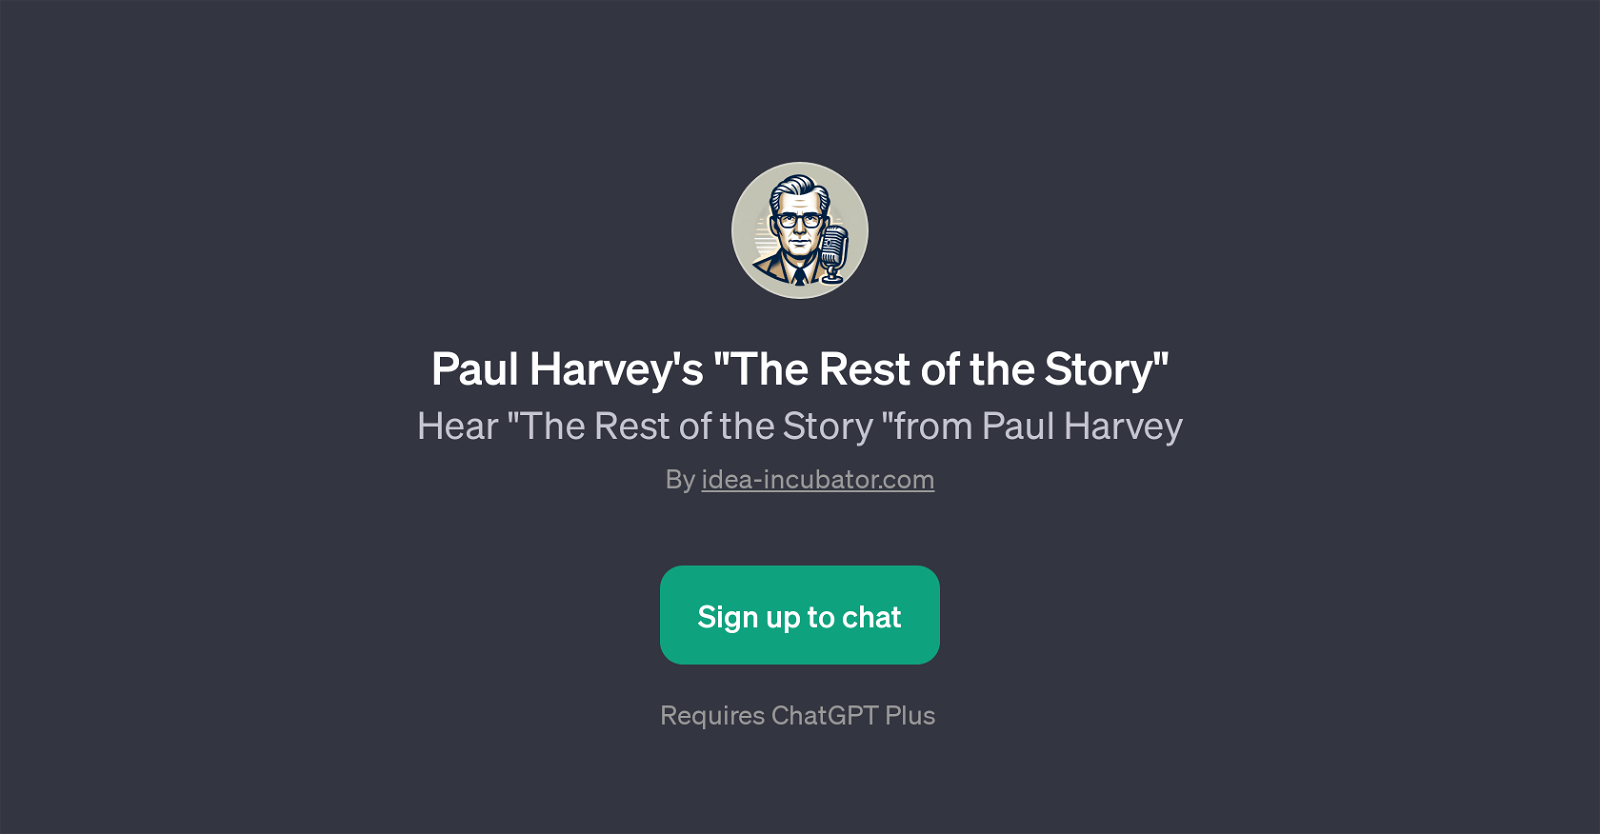 Paul Harvey's 'The Rest of the Story' website